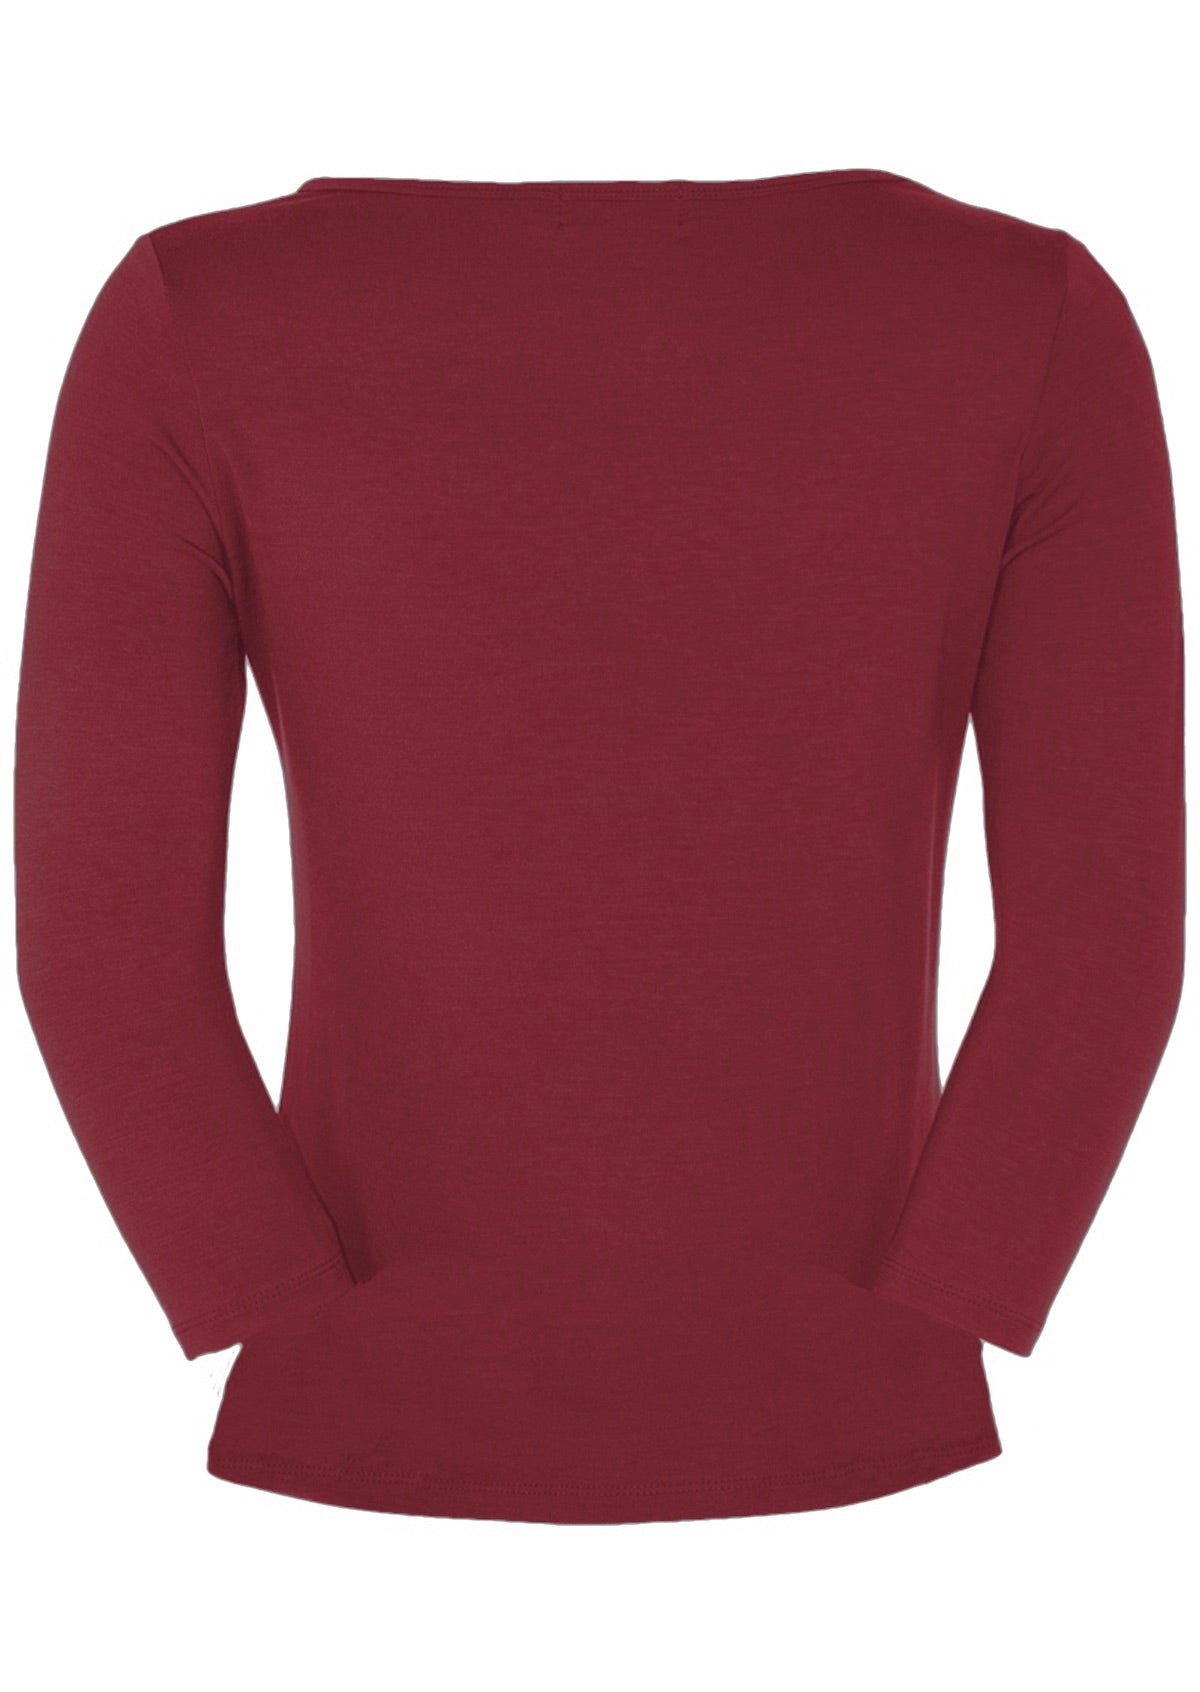 Back view of women's rayon boat neck maroon 3/4 sleeve top.